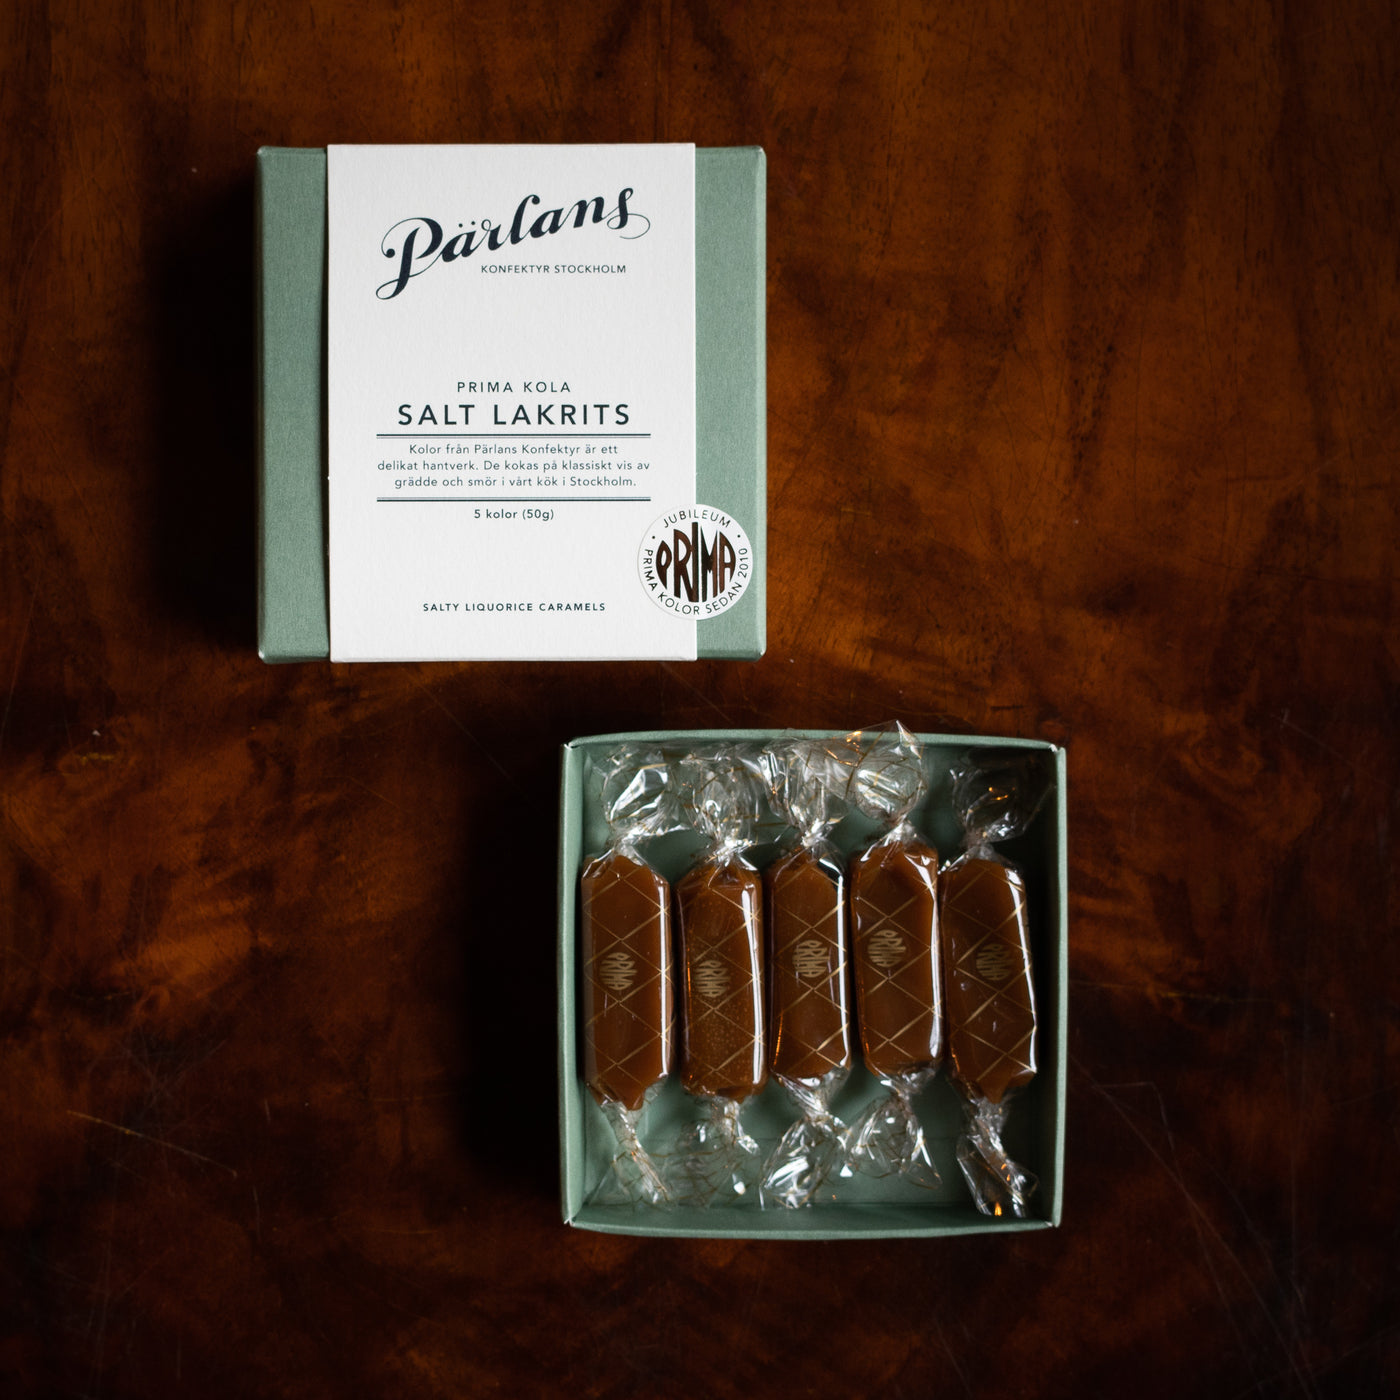 A neat box of smooth and buttery caramels, enticingly wrapped in cellophane. What’s not to love?<br><br>SALTY LIQUORICE – Creamy, sweet and salmiak salty! Some call salty liquorice ‘the most disgusting sweet ever’. We call salmiak an acquired taste for true connoisseurs. Odd, exotic and wildly addictive.